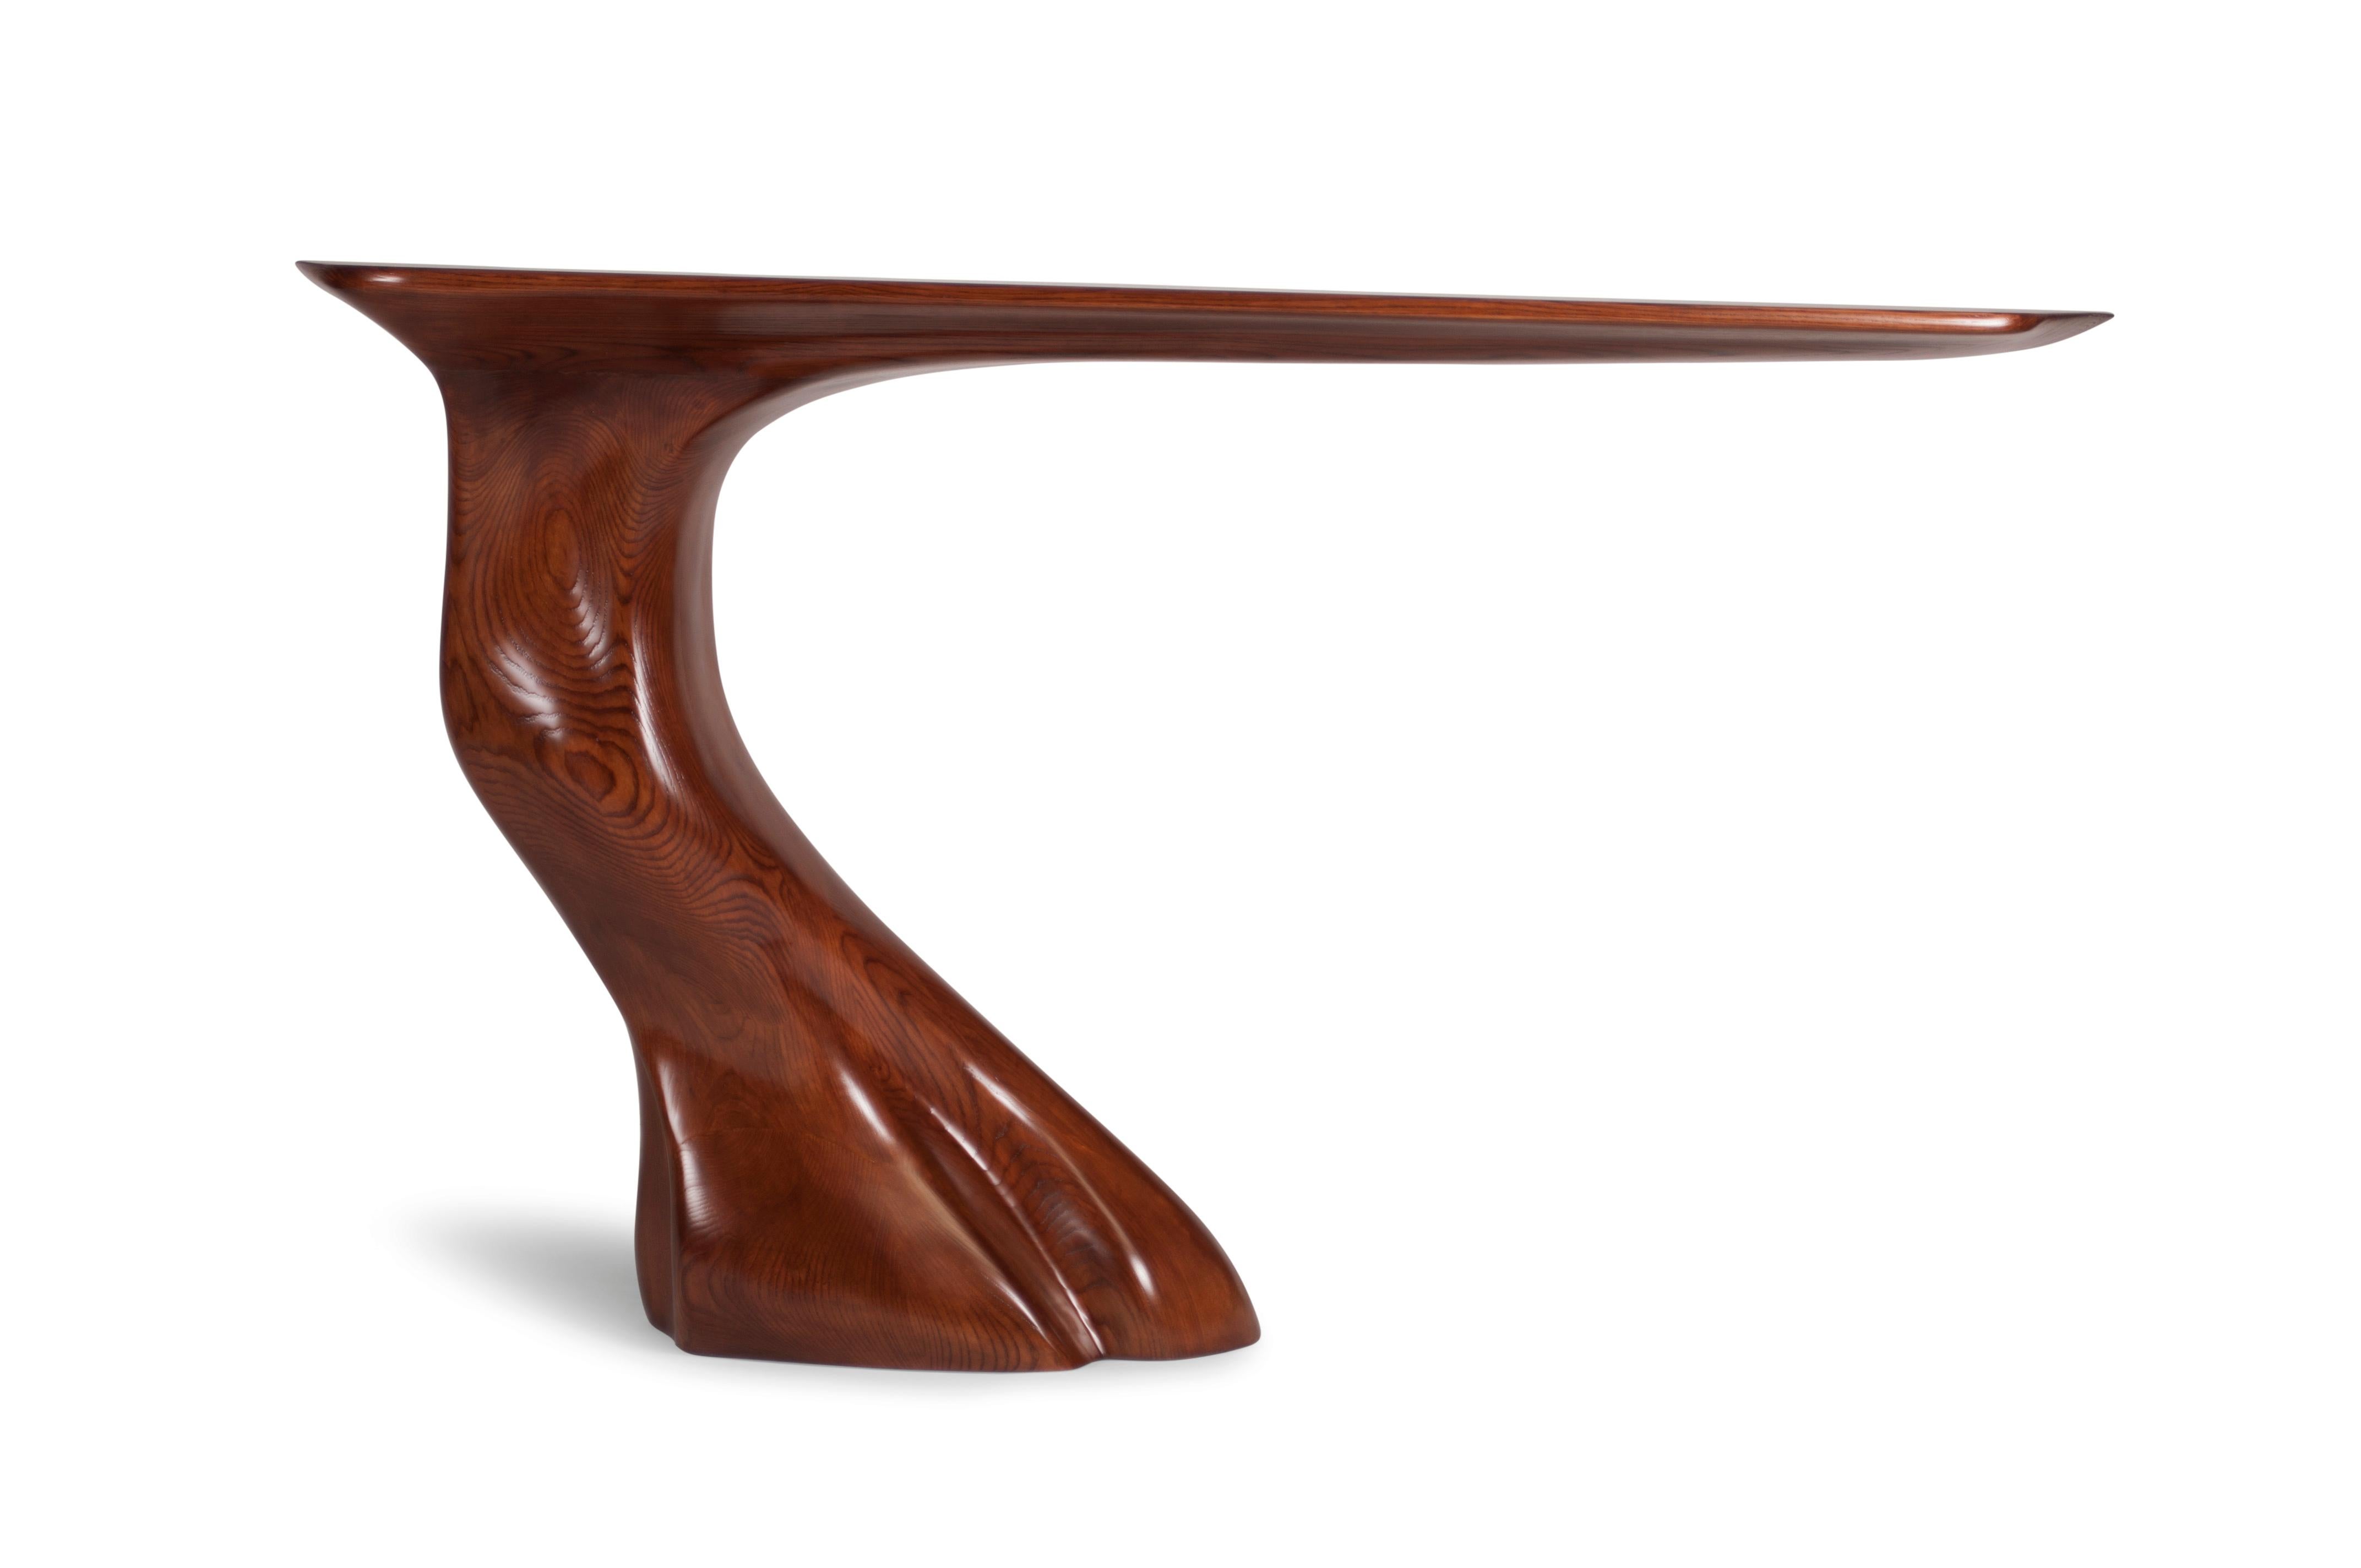 American Amorph Frolic wall mounted console table in Walnut stain on Ash wood For Sale